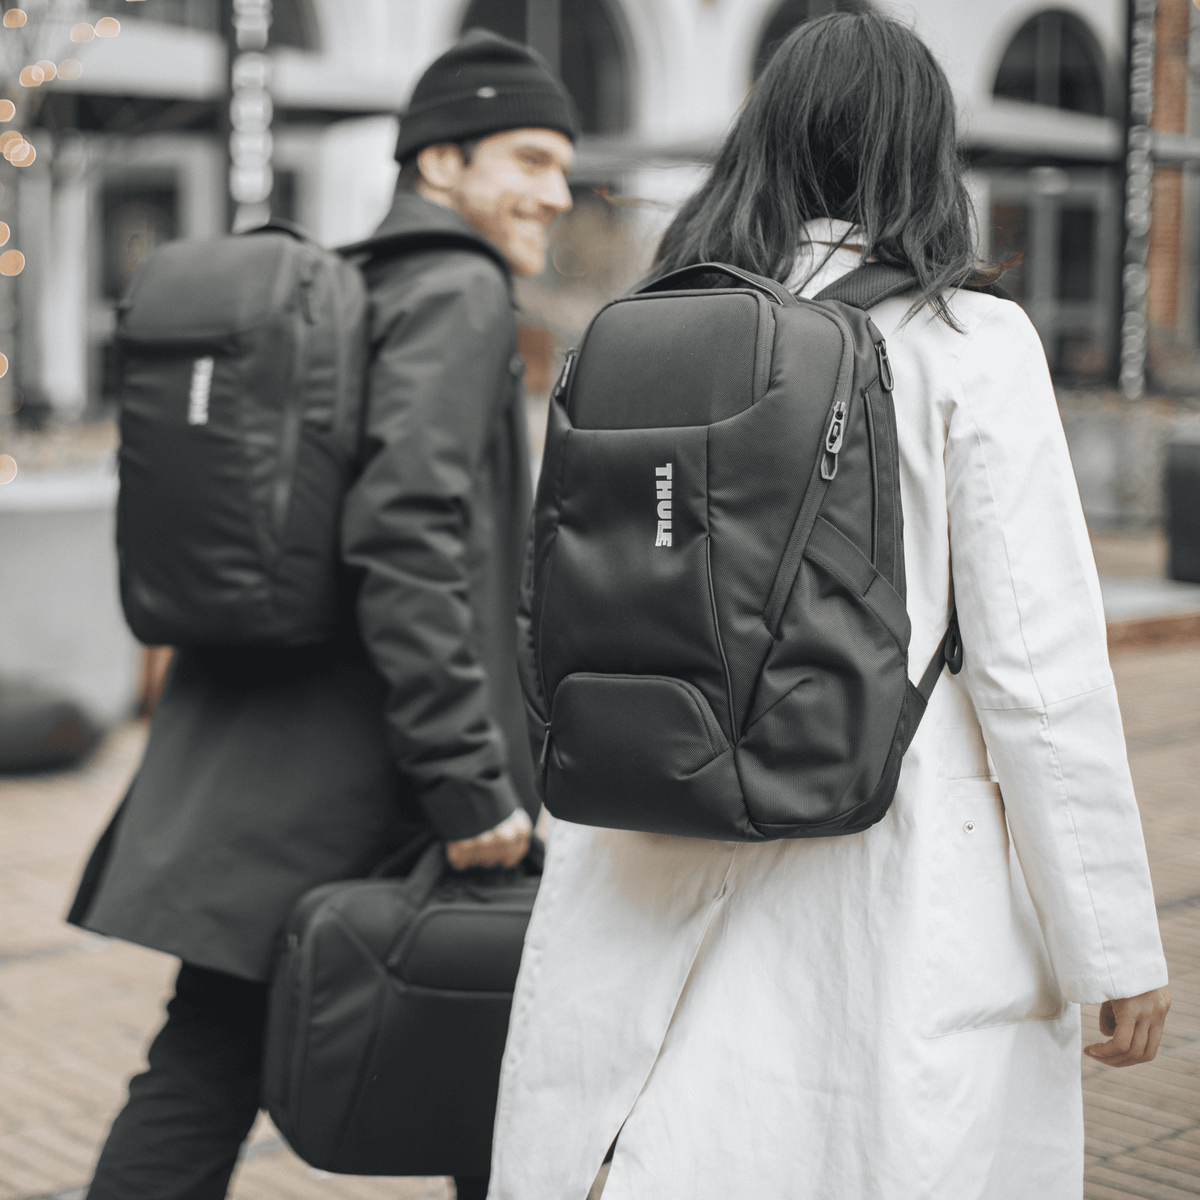 A man and a woman walk down a street and chat, carrying black Thule Accent backpacks.